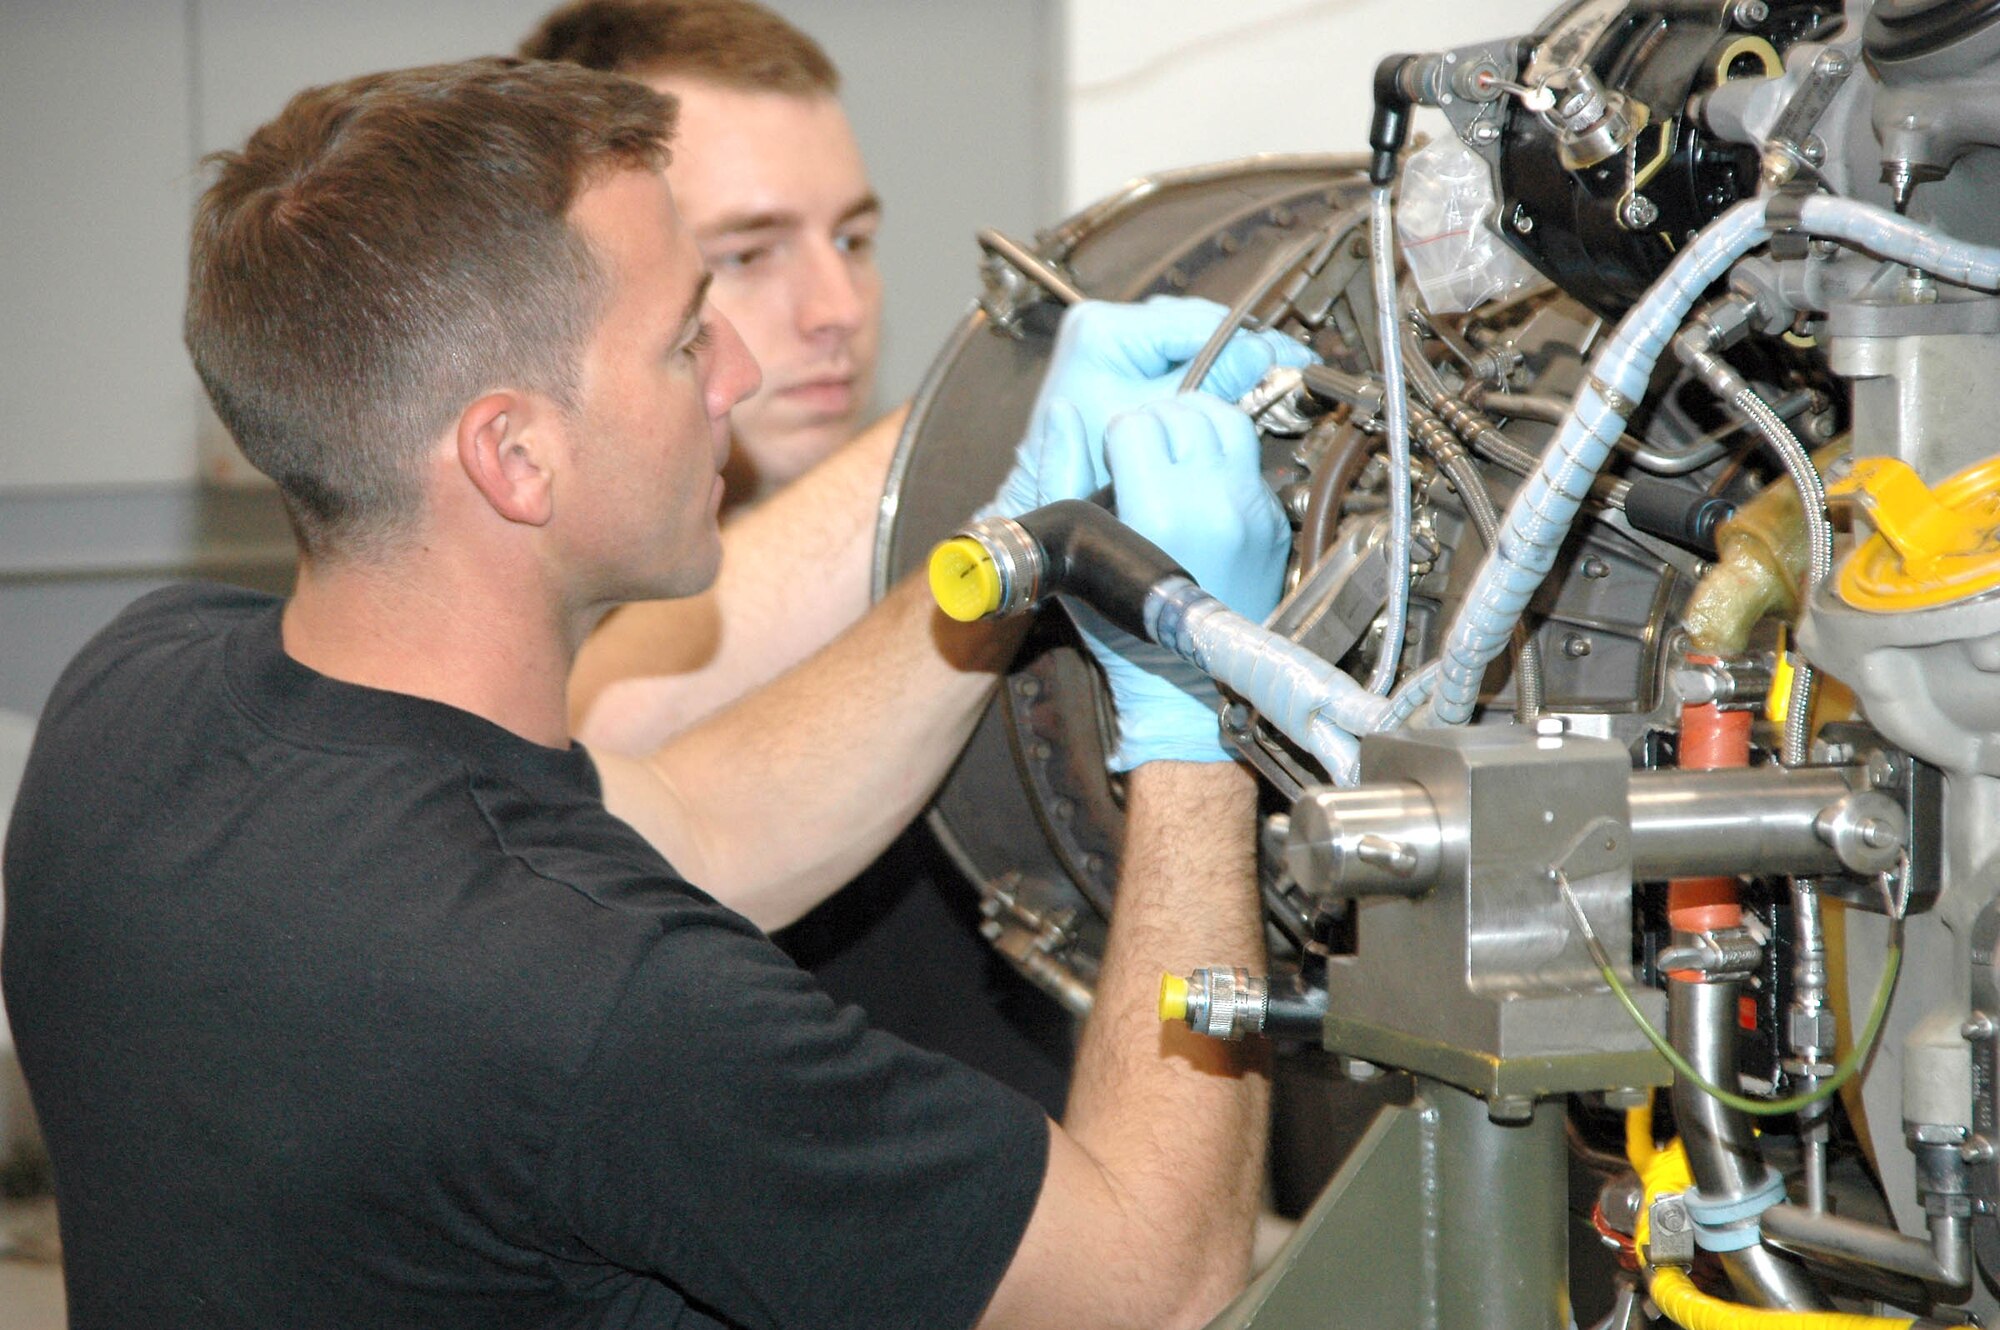 PATRICK AIR FORCE BASE, Fla. - Air Force Reservists Senior Airman Mathew Wandell and Staff Sgt. David Rowlands, 920th Maintenance Propulsion Shop, perform maintenance on a T-700 engine from an HH-60G Pave Hawk rescue helicopter during a recent 920th Rescue Wing Unit Training Assembly.  The Air Force Reserve offers taxpayers an incredible return on investment.  Air Force Reserve programs provide about 20 percent of the AF's capability for about 4 percent of the total AF budget.   (U.S. Air Force Photo/Master Sgt. Raymond F. Padgett)